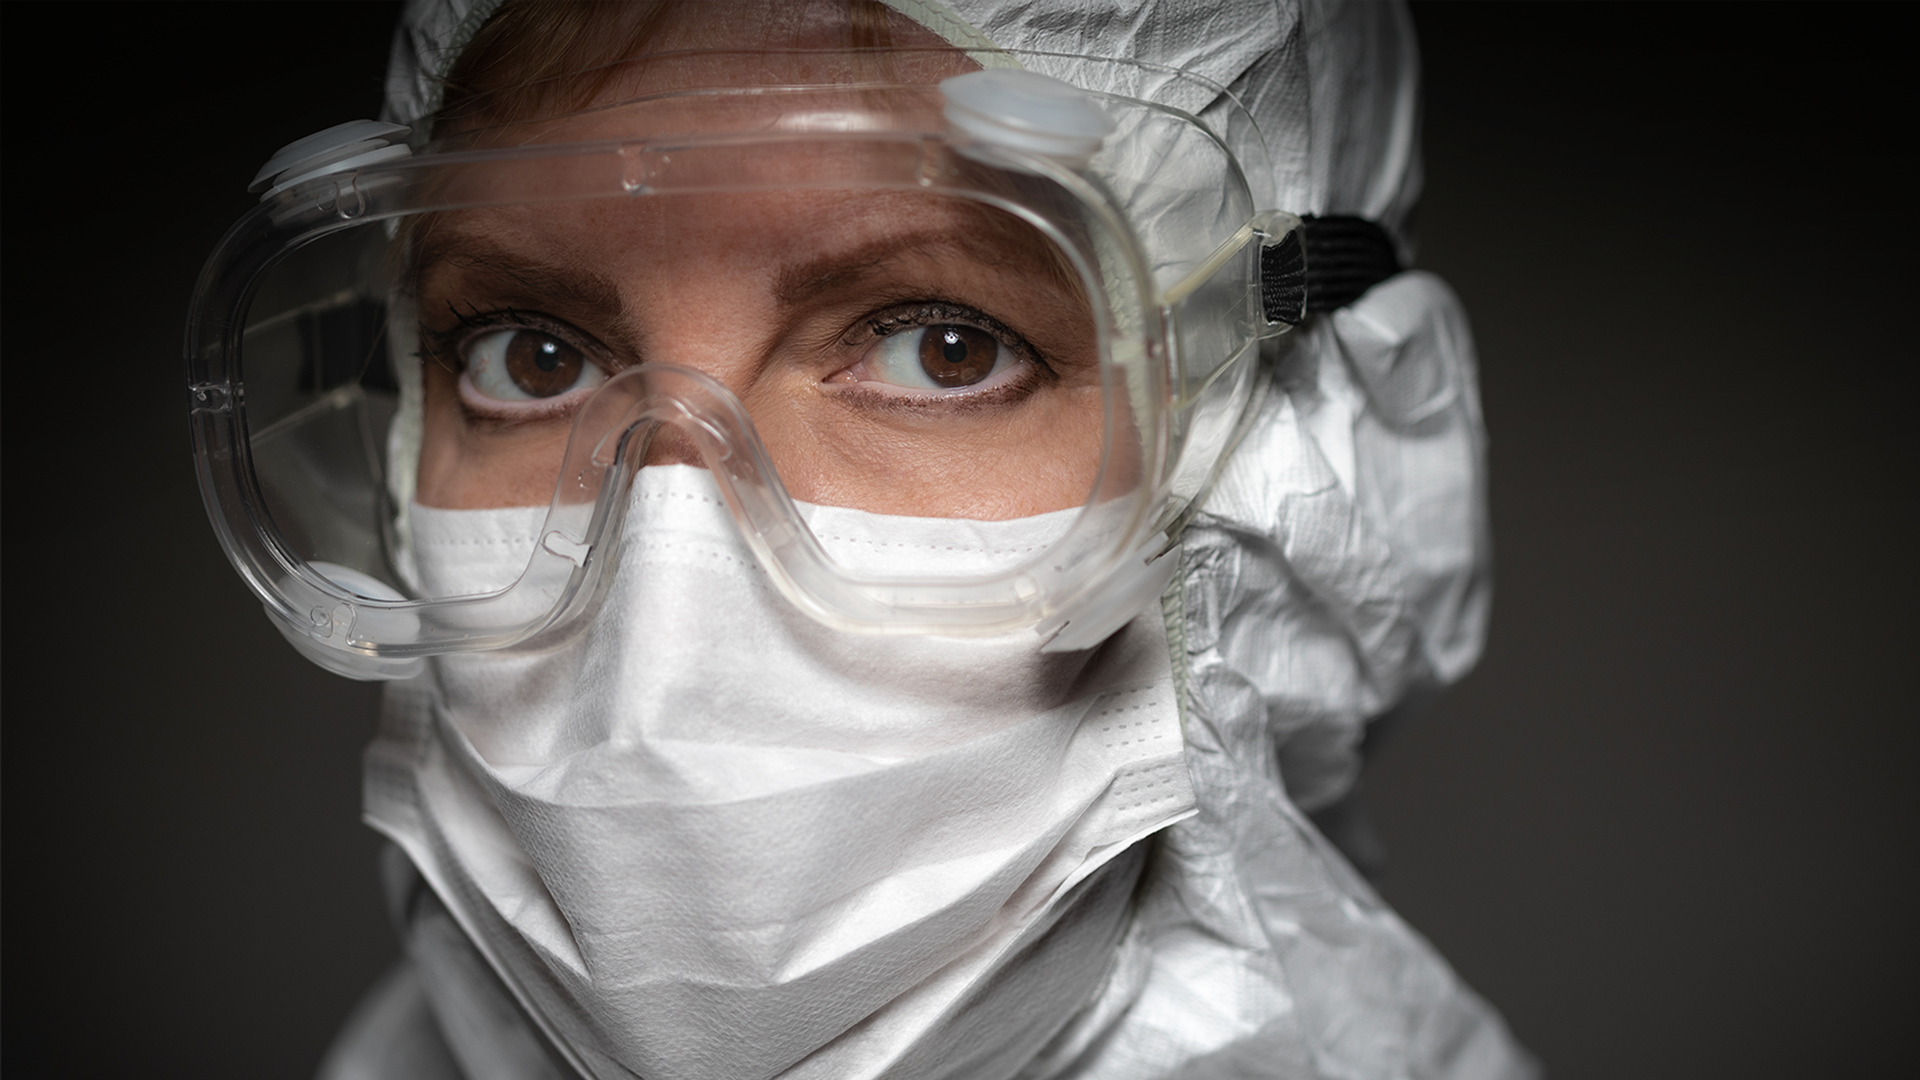 Would You Wear a Nose Mask? New COVID-19 Protective Gear Developed